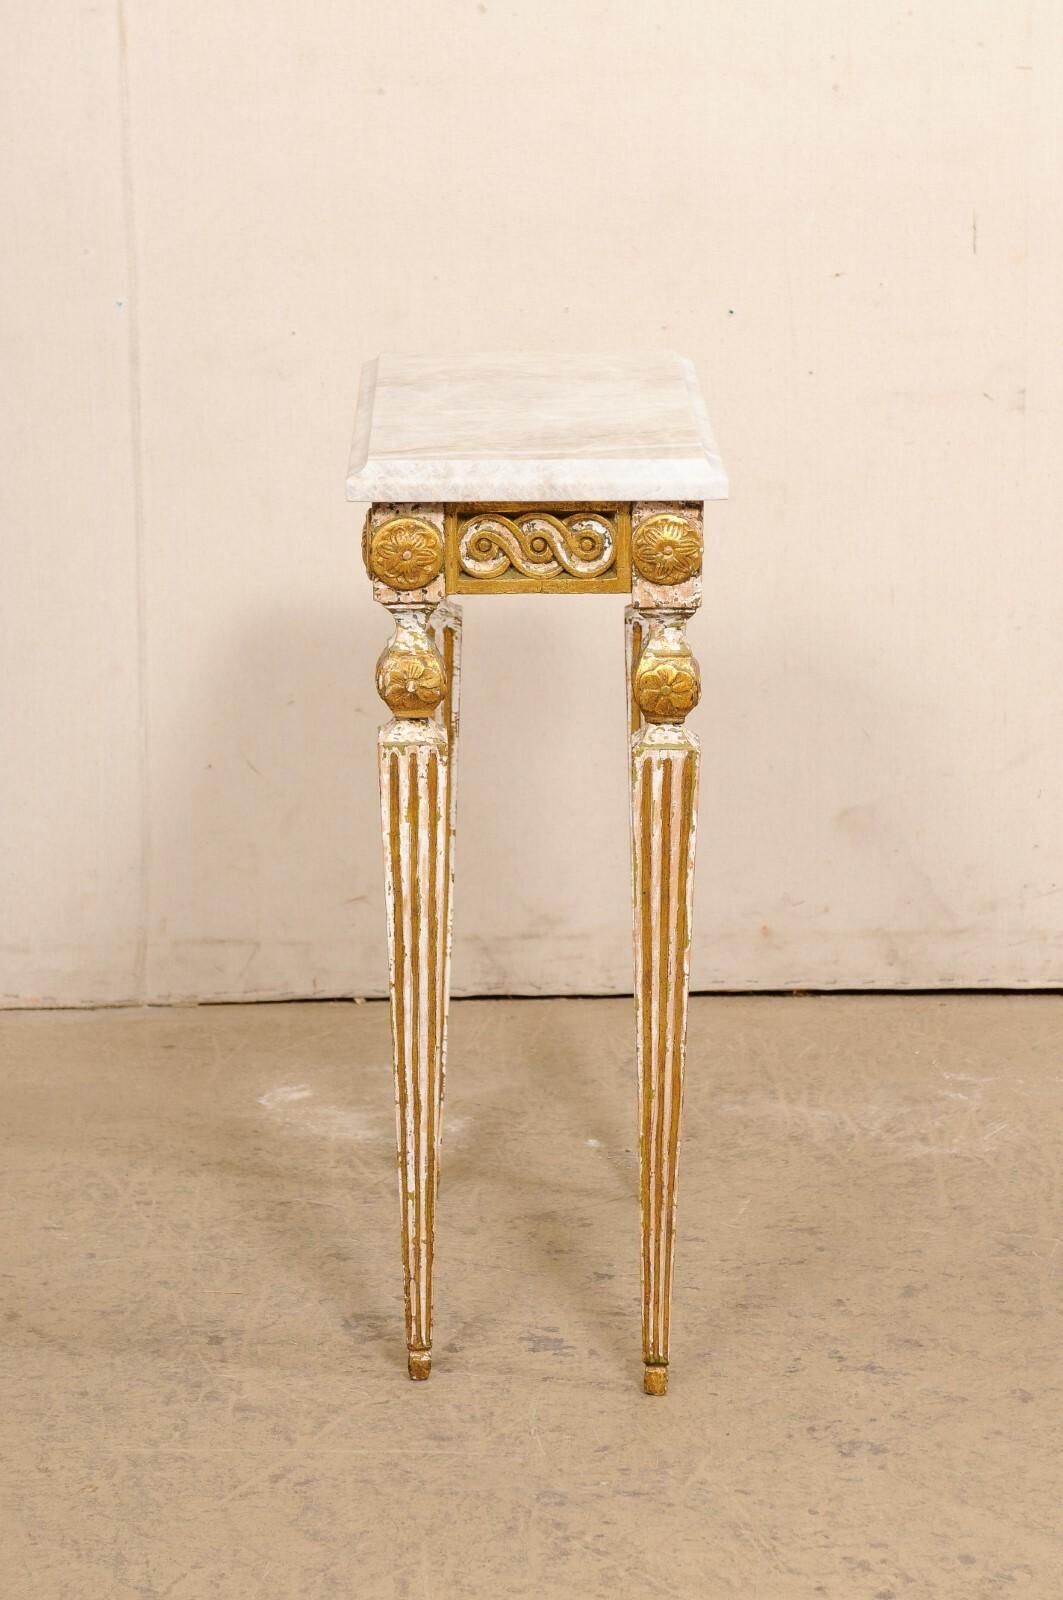 An Italian small-sized carved and gilt wood table with stone top from the early to mid 20th century. This antique table from Italy has been fitted with a new quartzite 